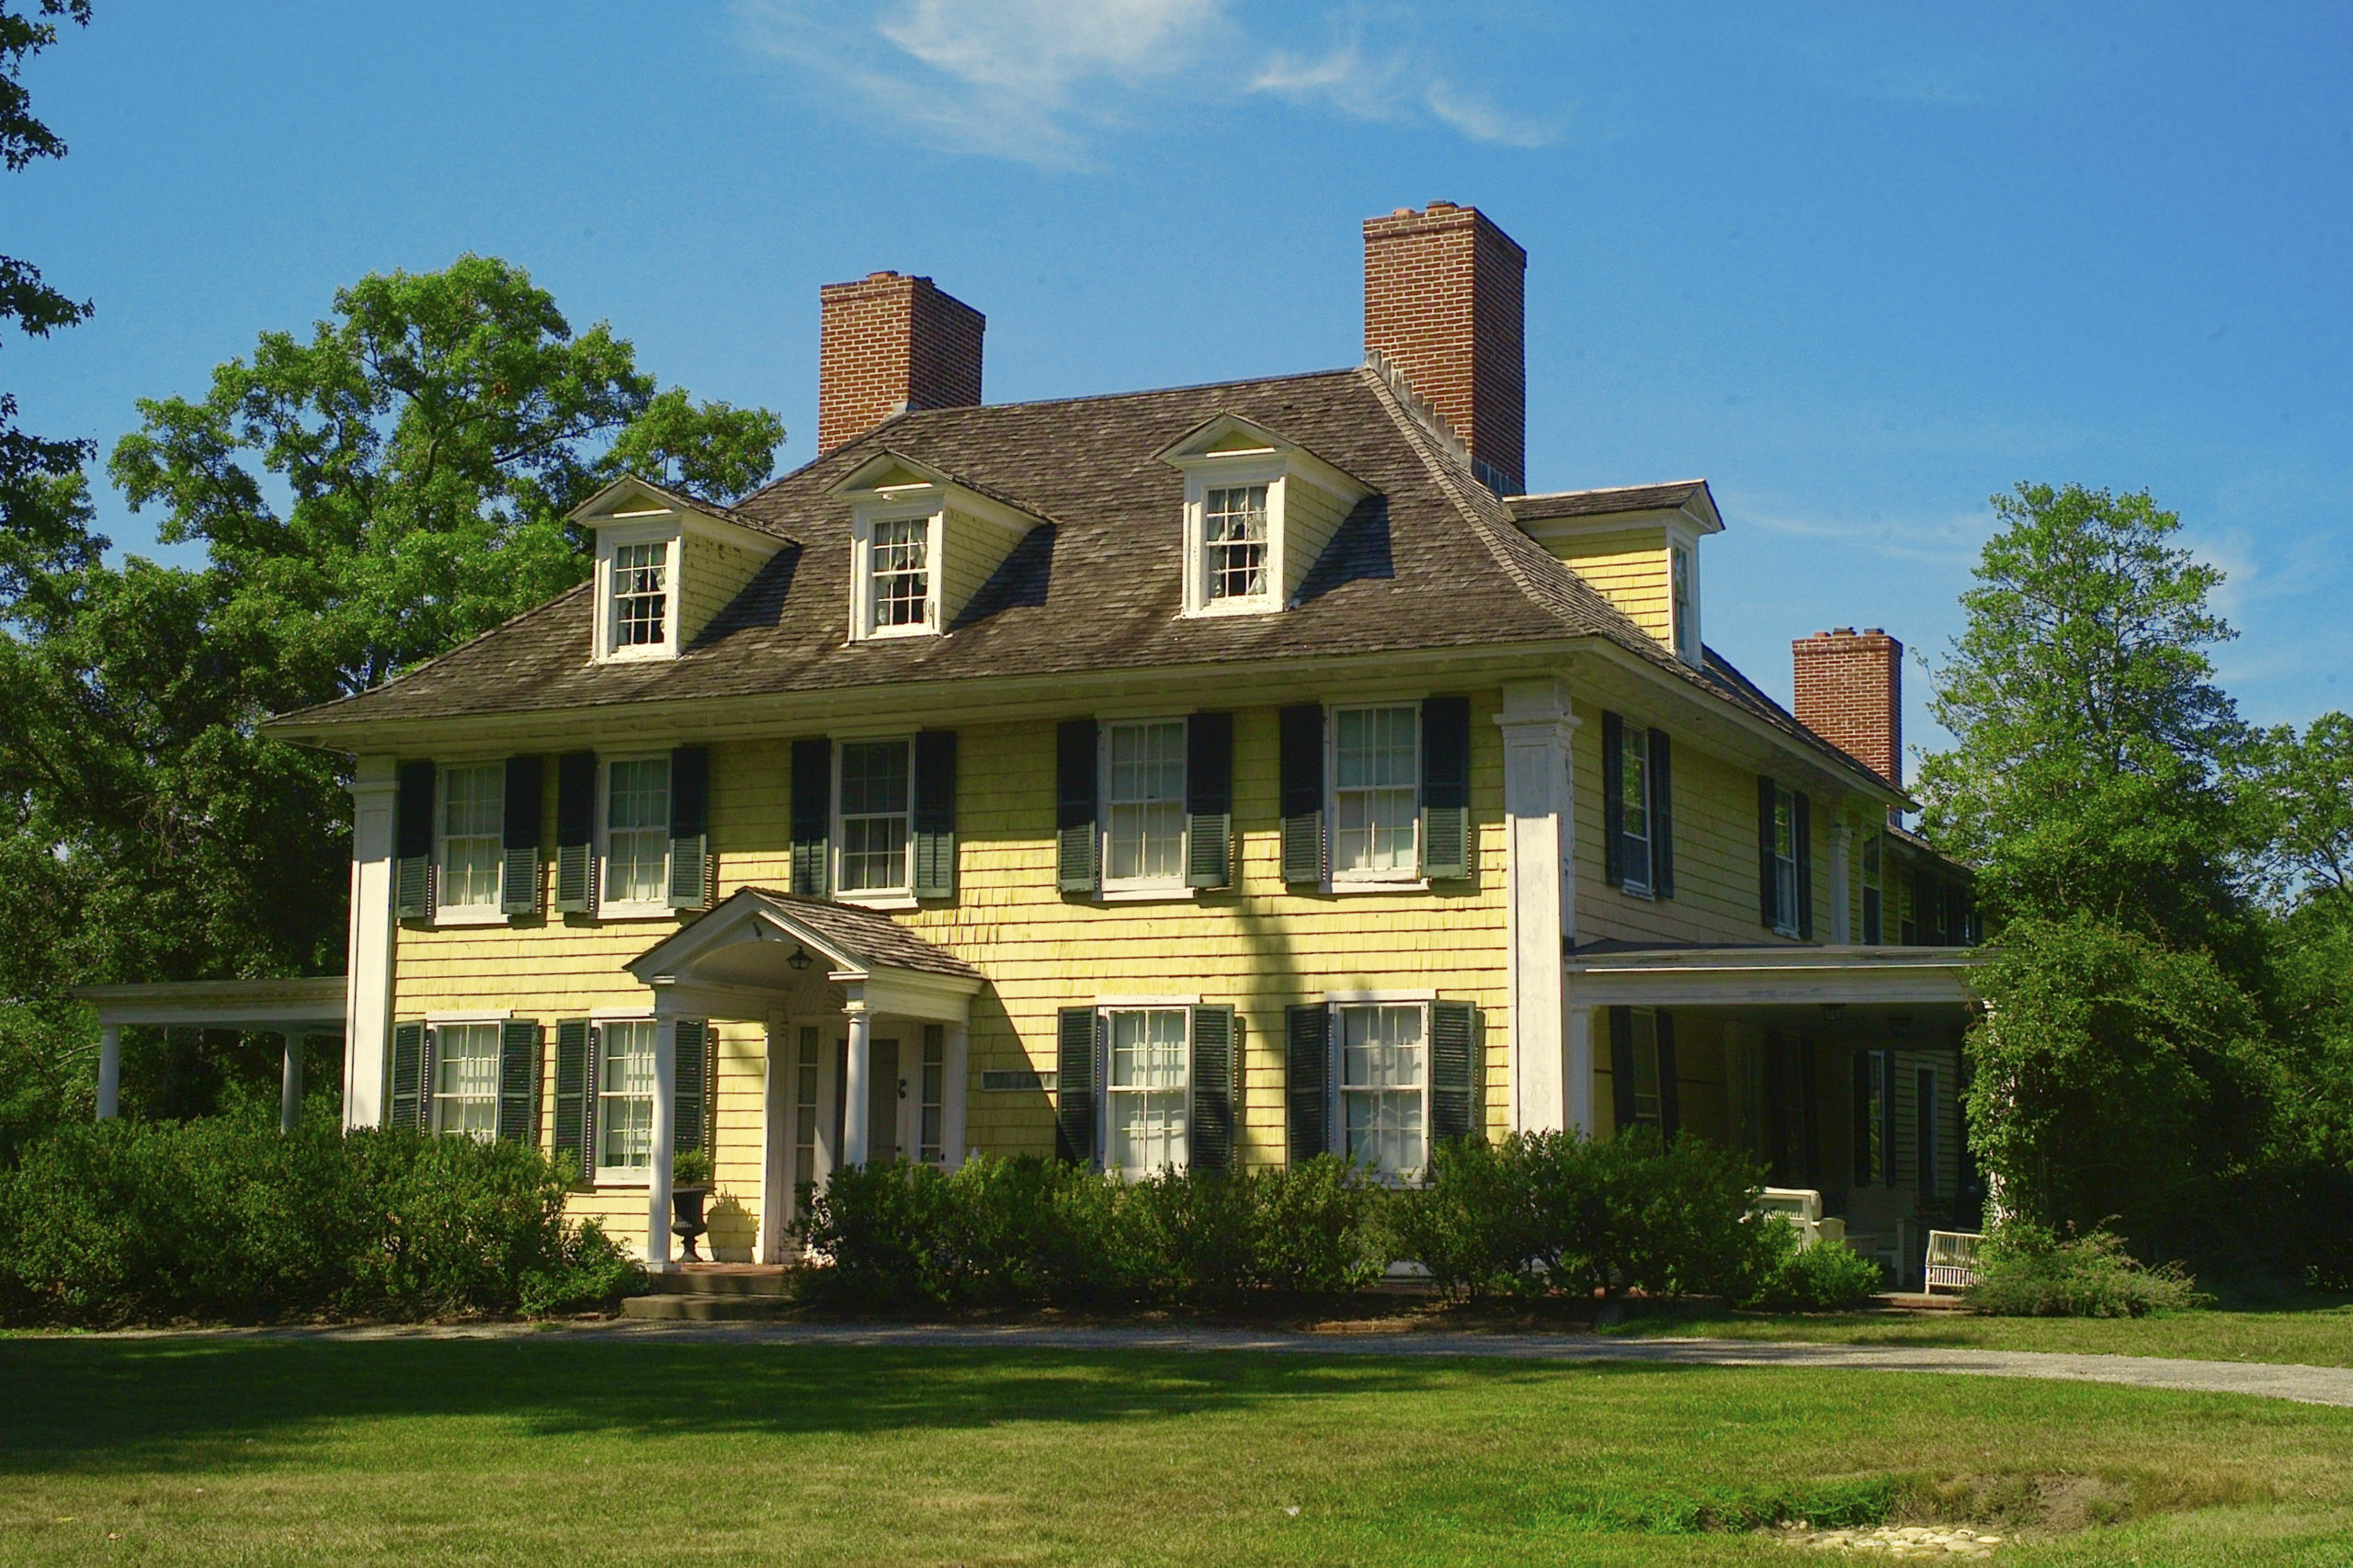 The Sylvester Manor house built 1737.